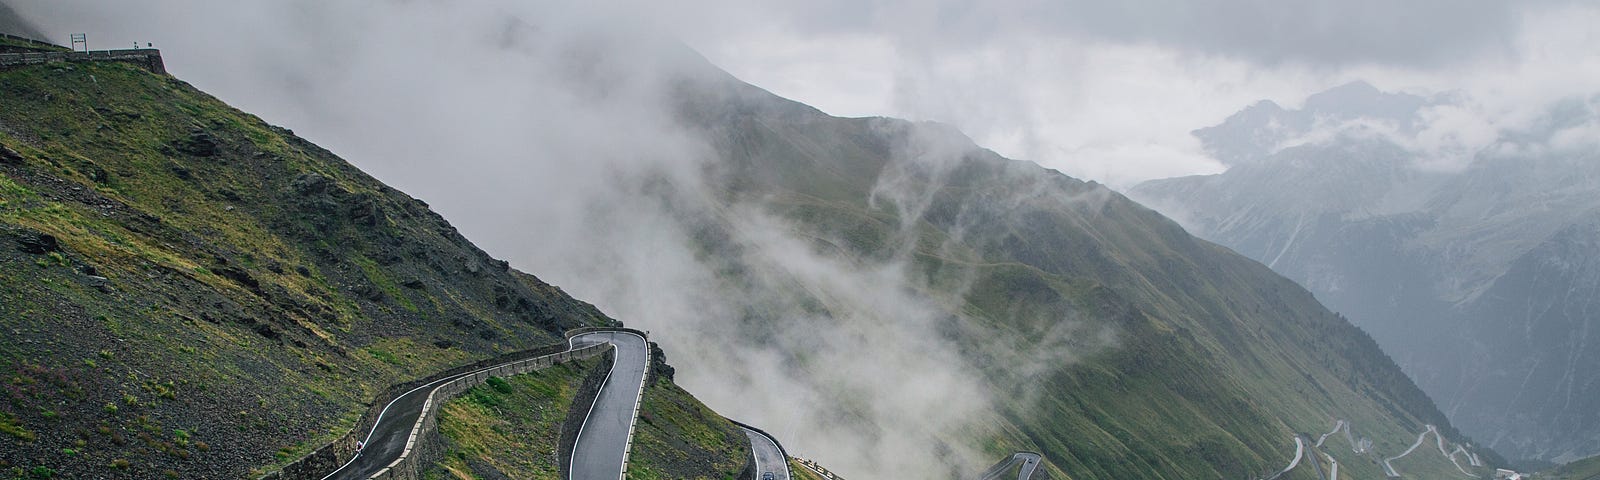 photograph of cars winding up a mountain road with a series of hairpin turns and switchbacks.